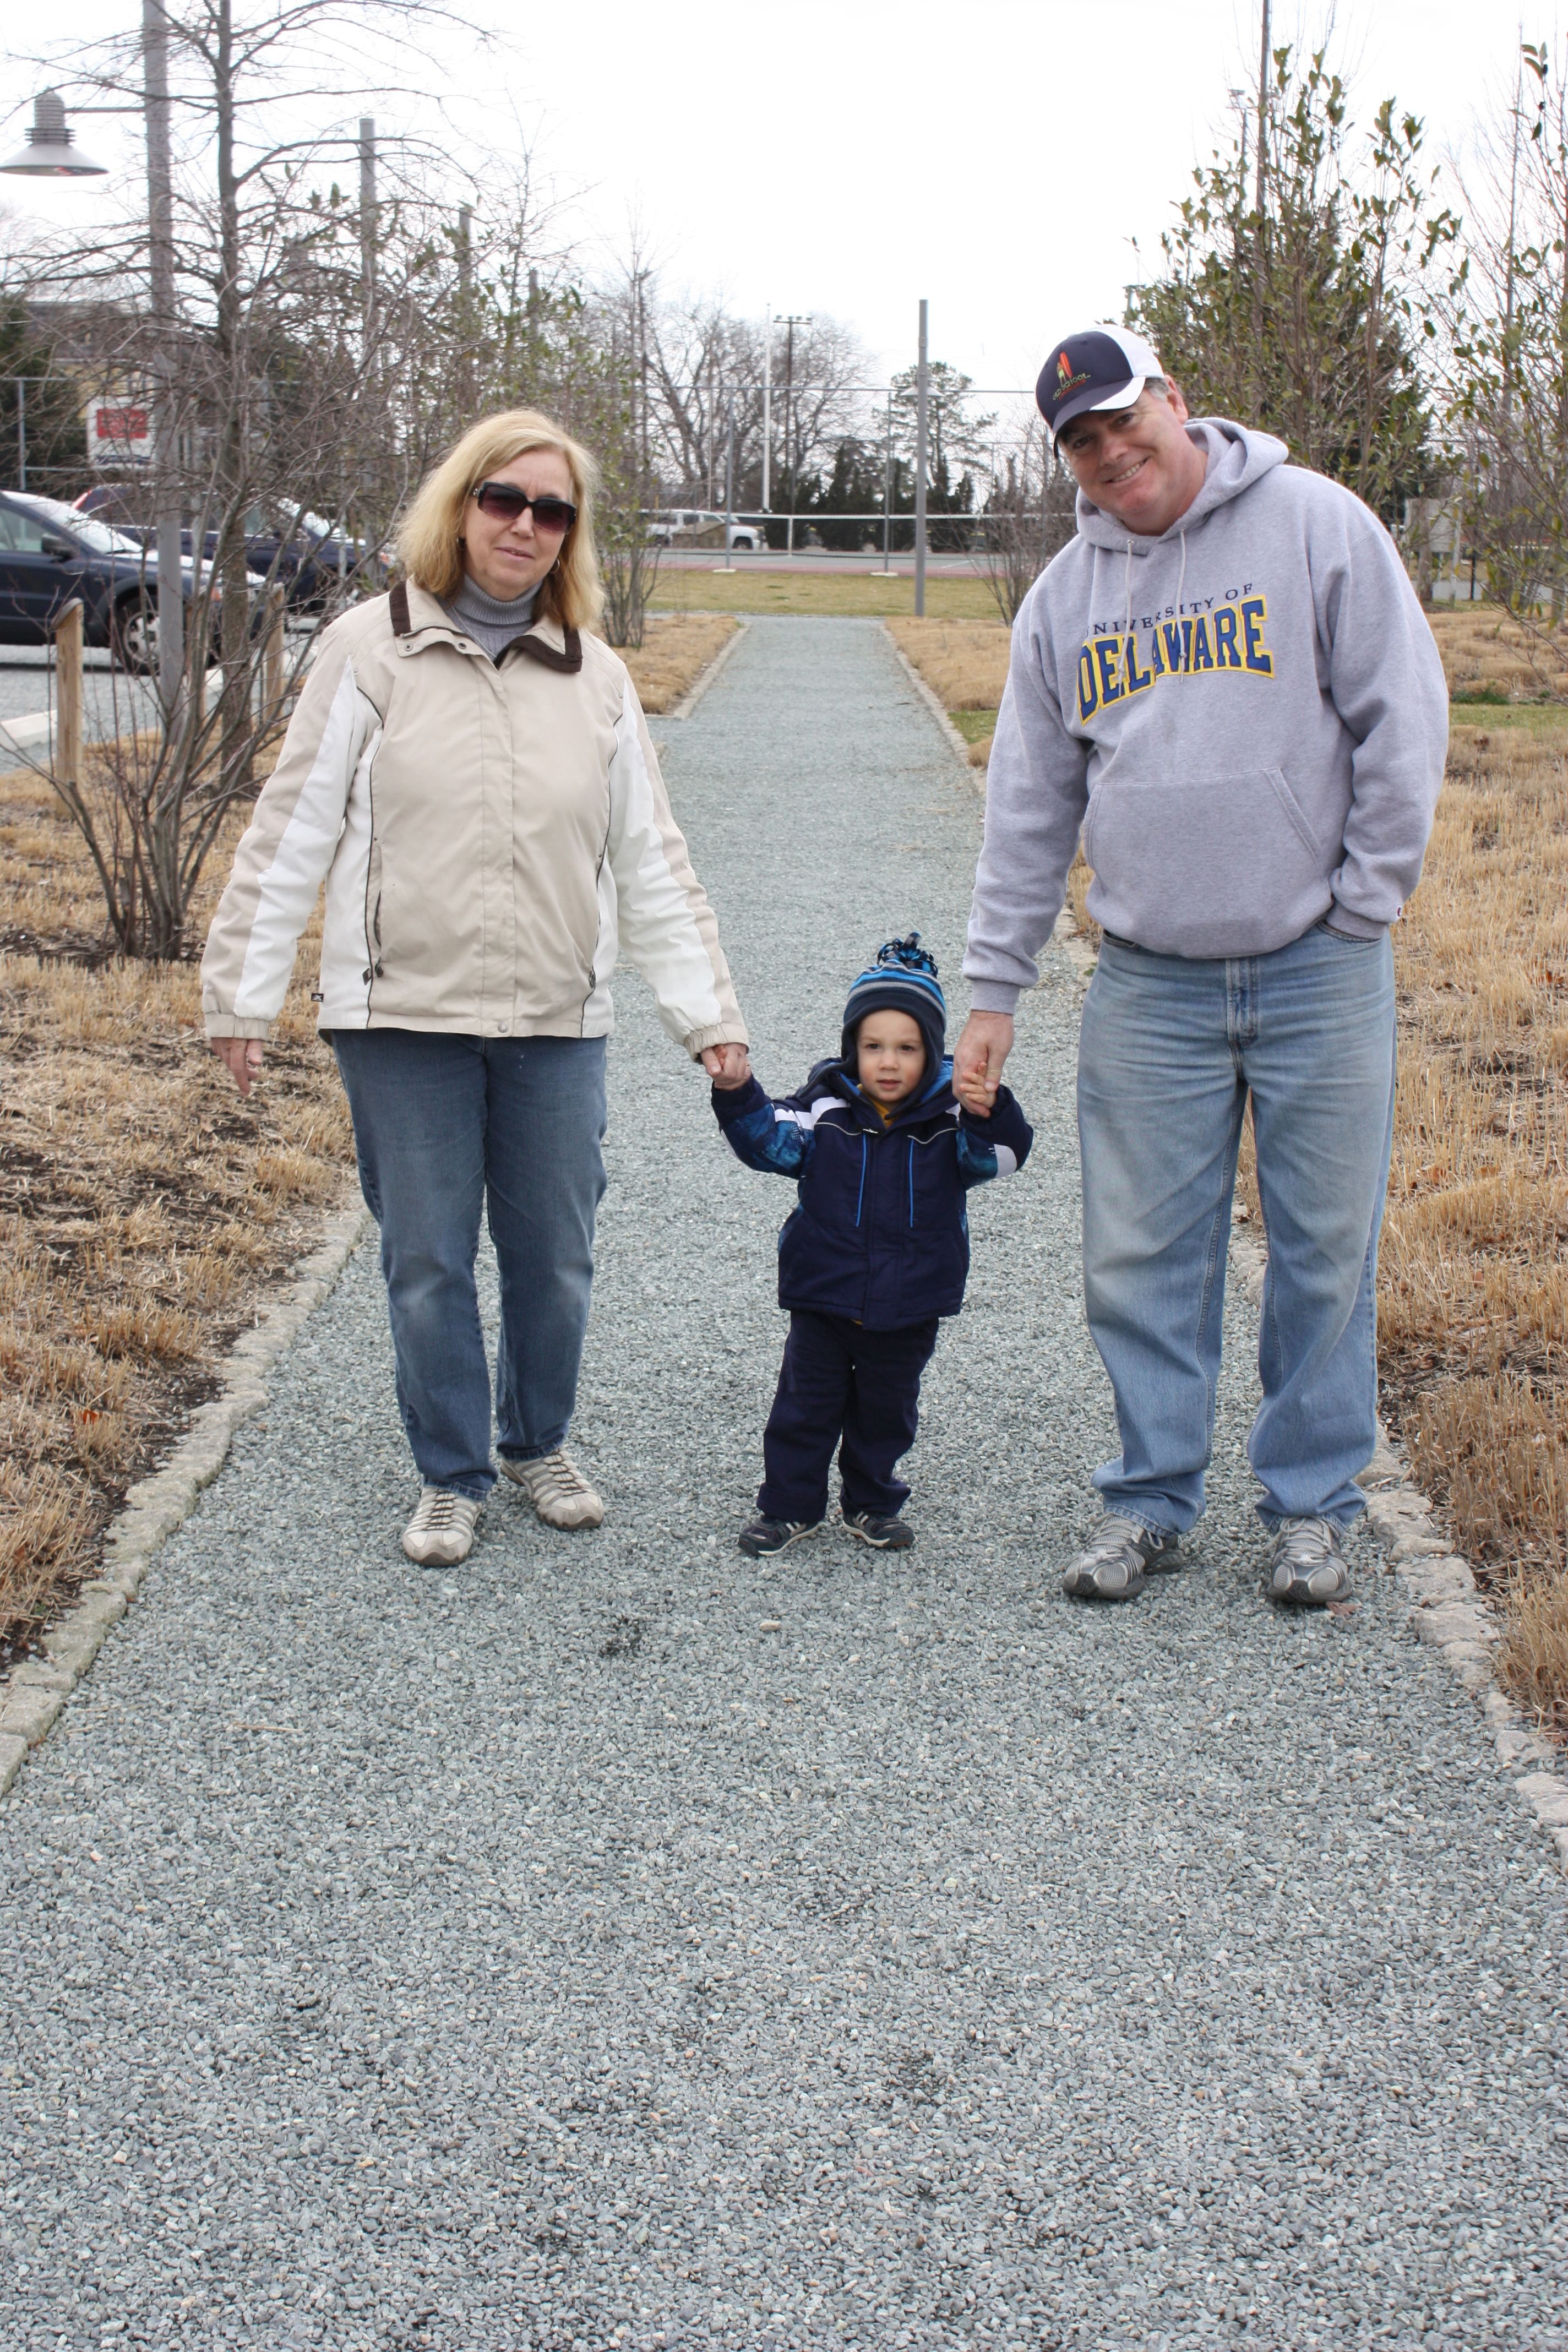 Mom, Larry and The Bug at the park in Lewes